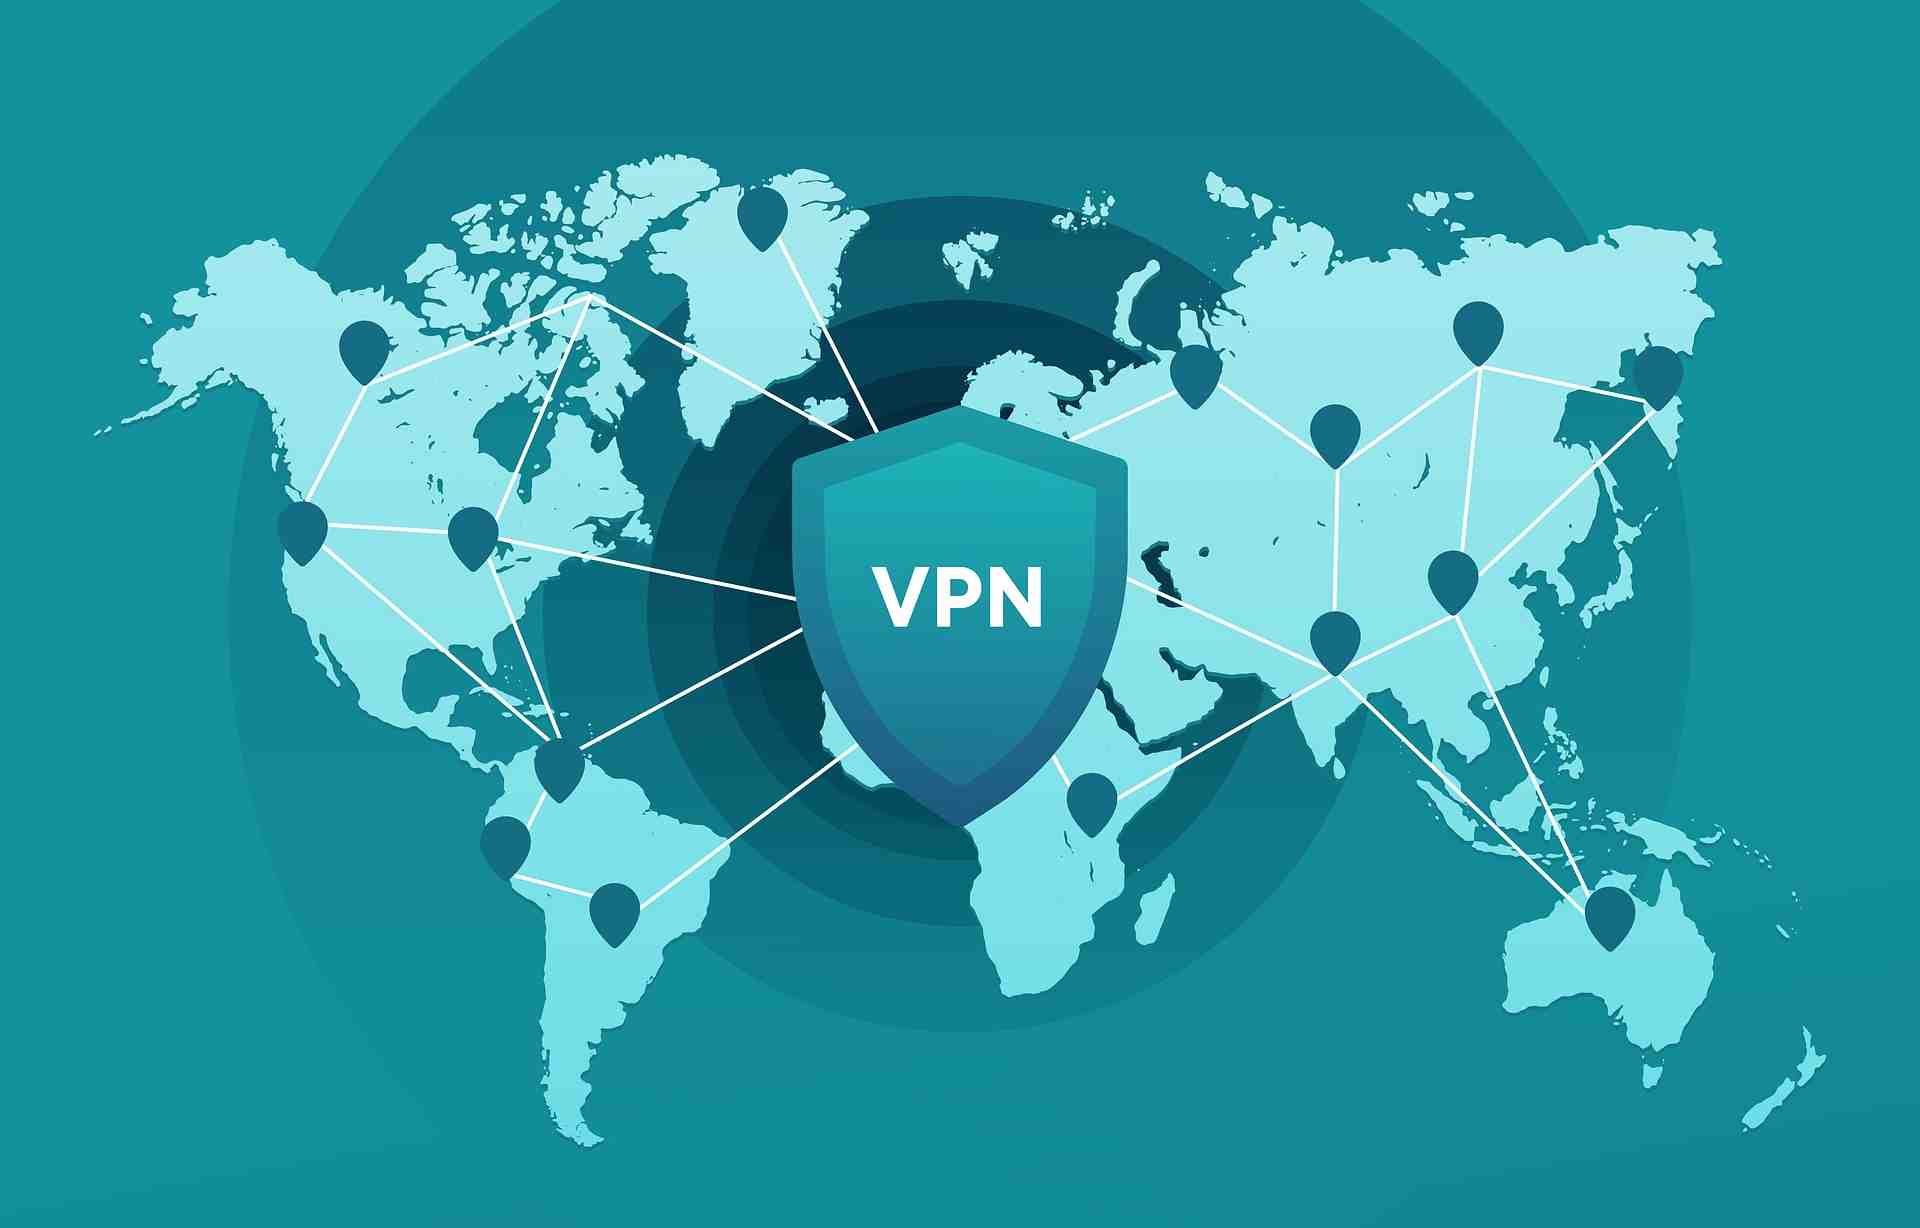 Why do countries ban VPN?